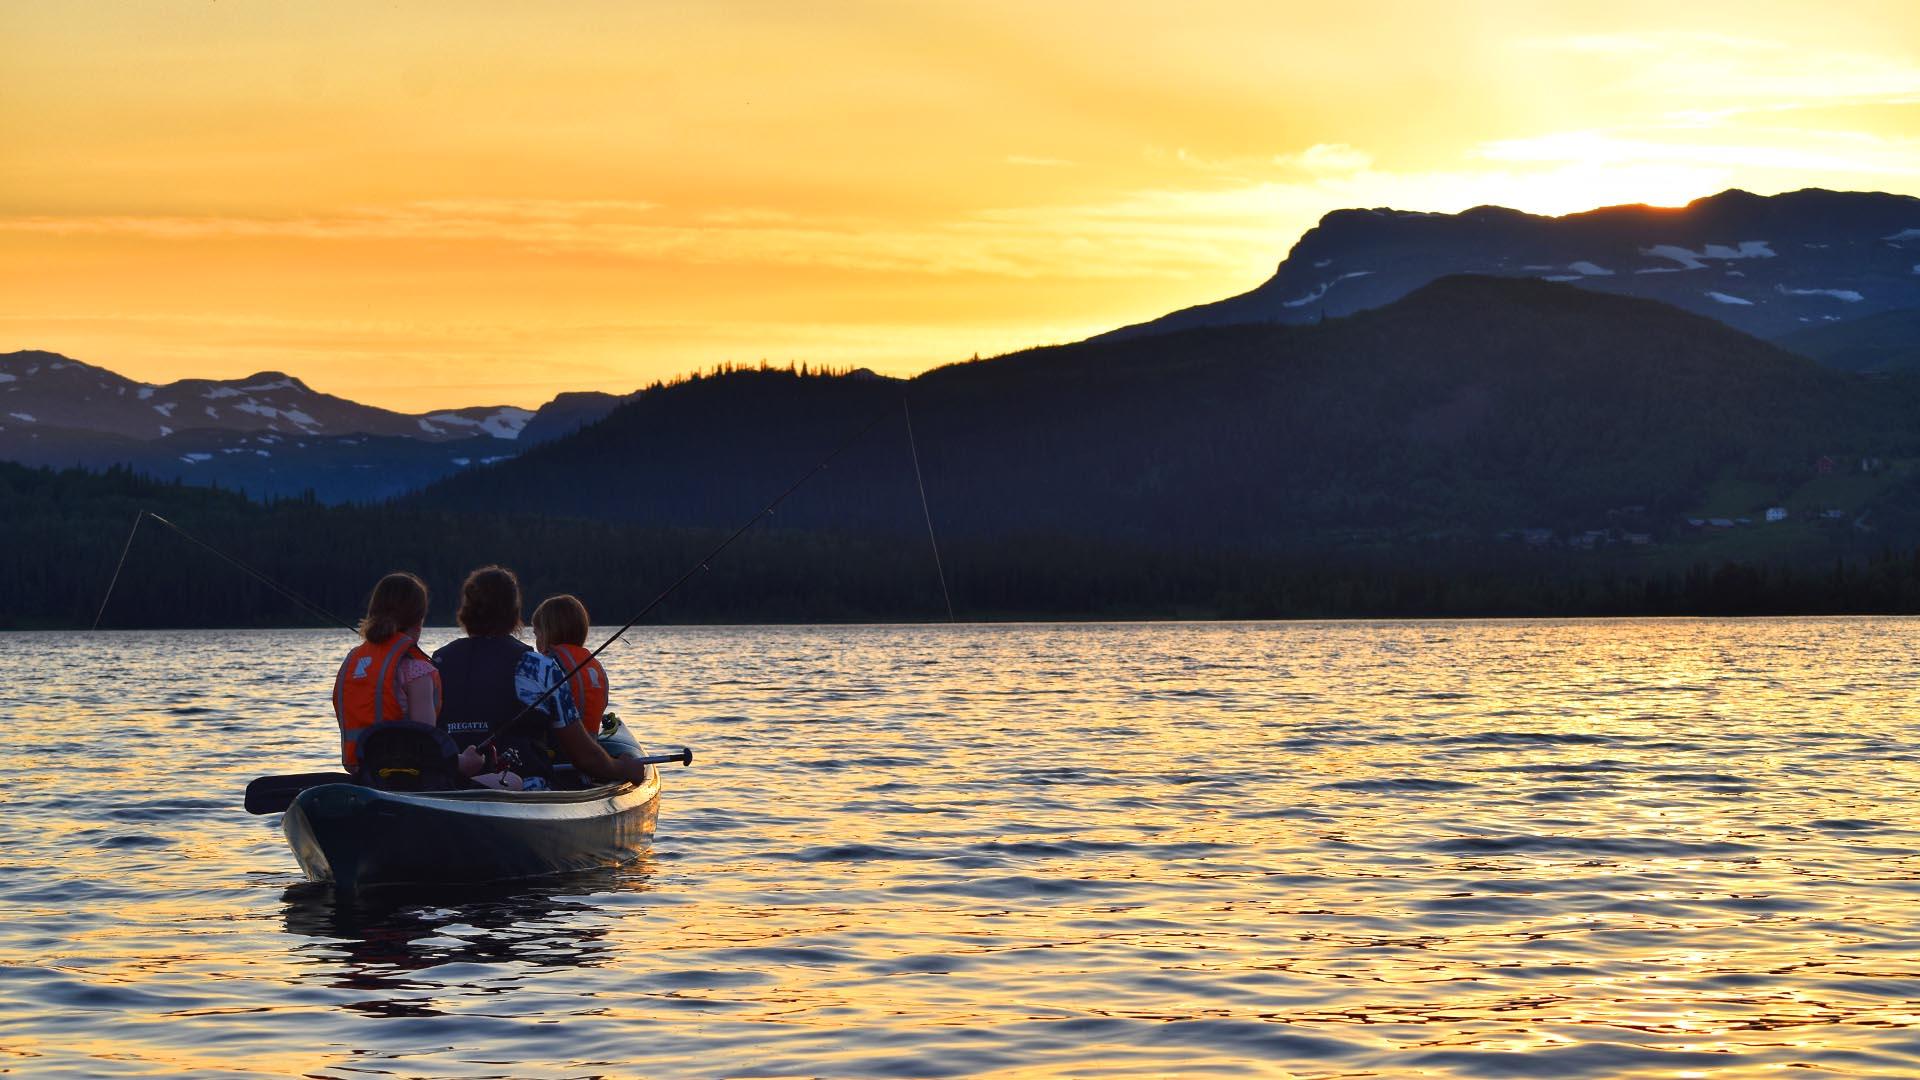 A canoe with three persons that fish with rod on a lake with mountains in teh background. The setting sun paints the sky and the water in yellow and orange.